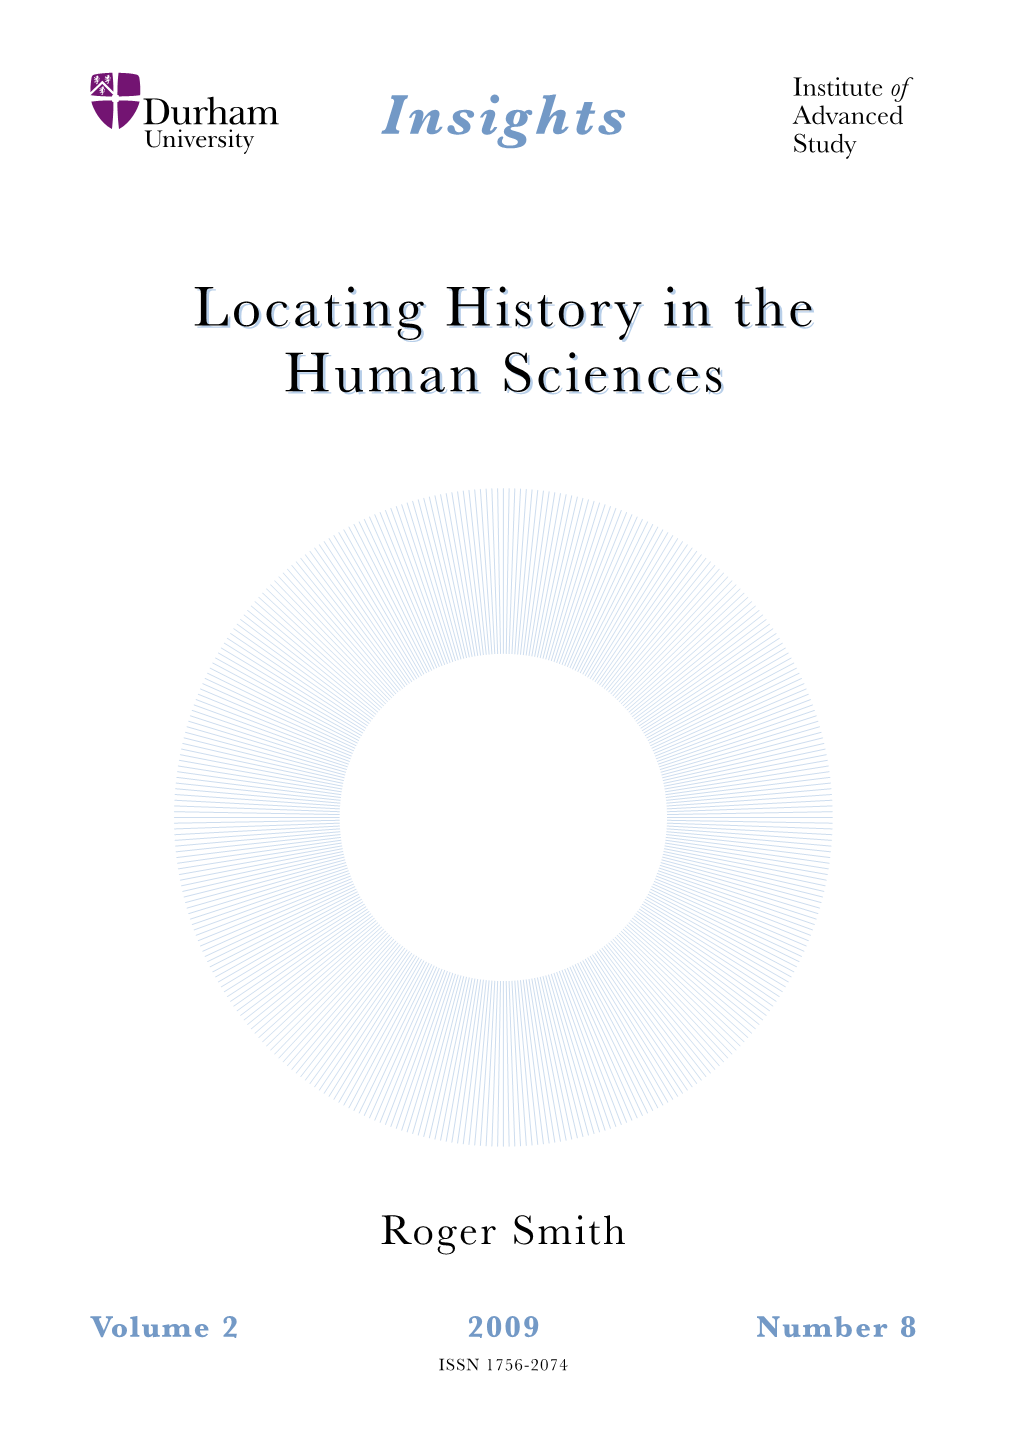 Locating History in the Human Sciences